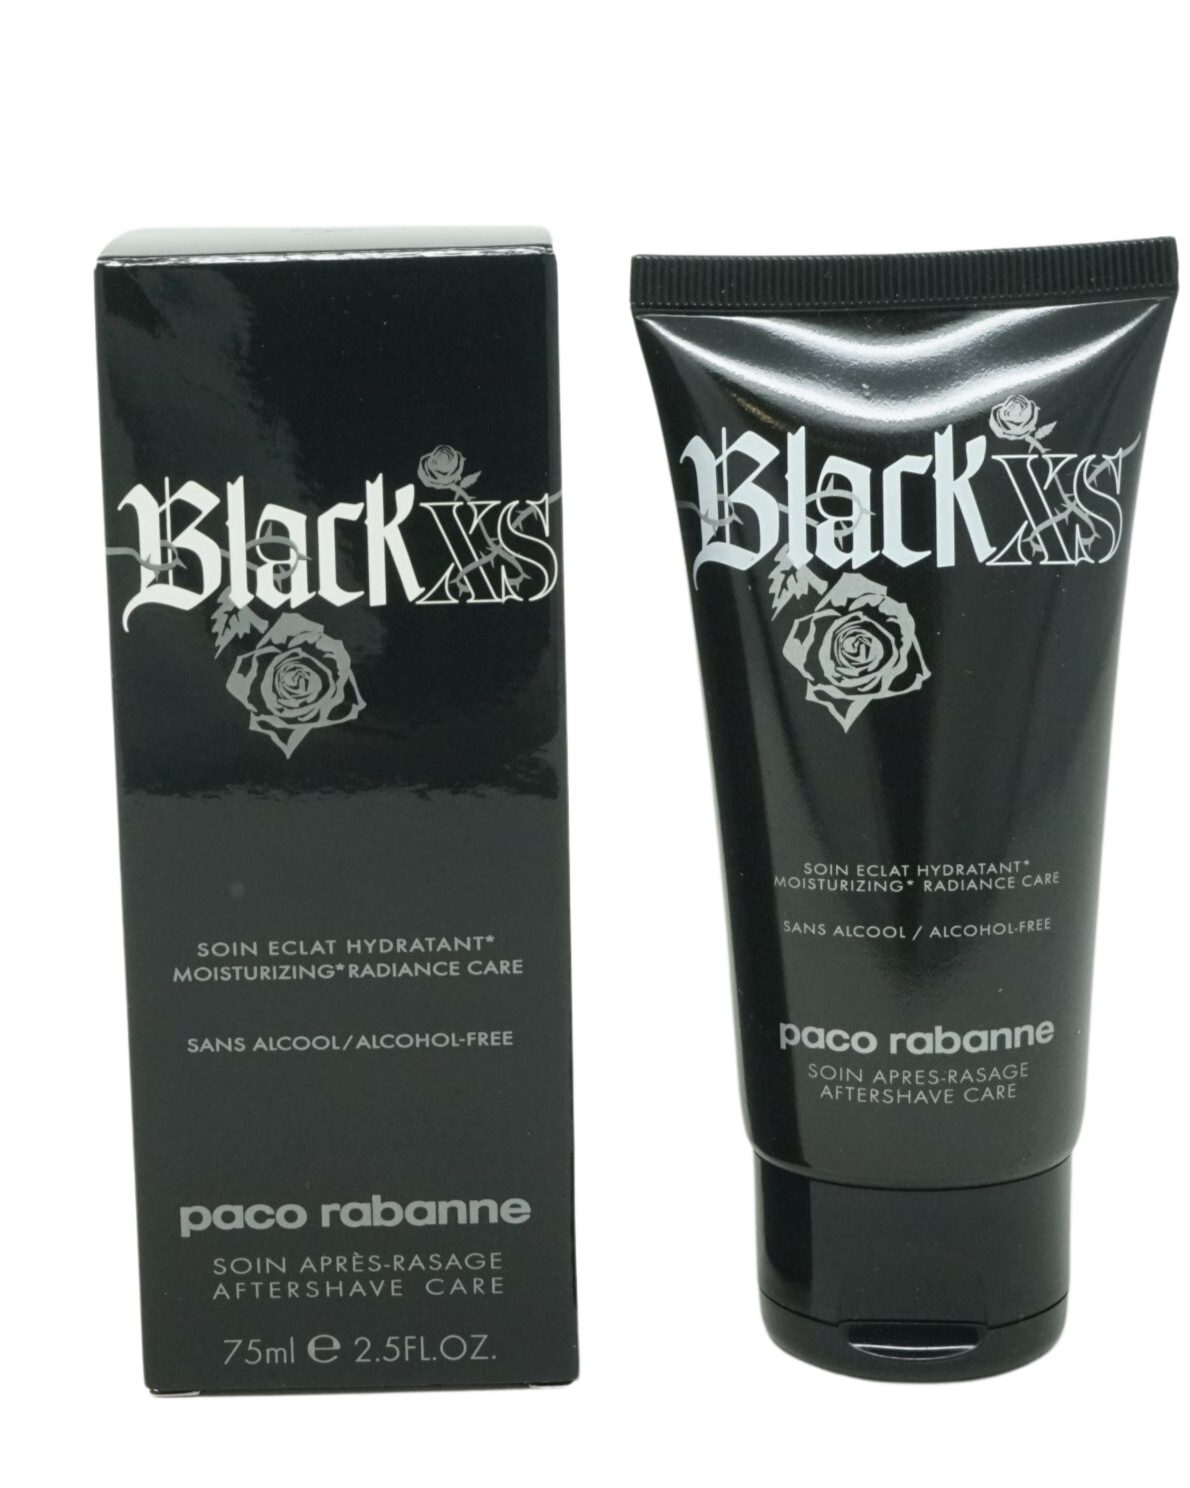 Black 75ml paco rabanne Shave paco XS Care After-Shave Rabanne After